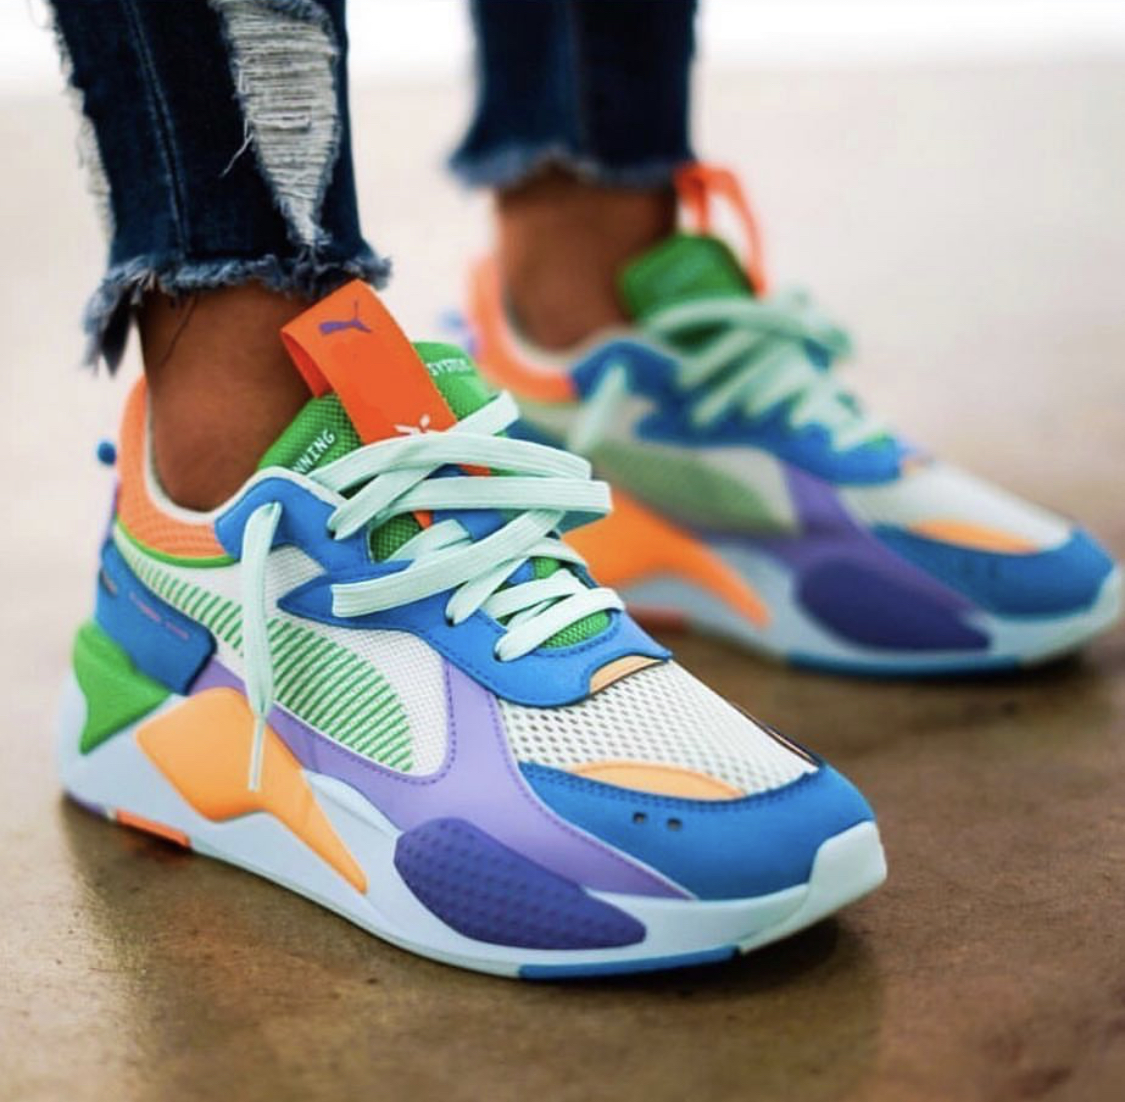 Vulkan grill Interpretive Now Available: Women's Puma RS-X Toys "Colorblock" — Sneaker Shouts